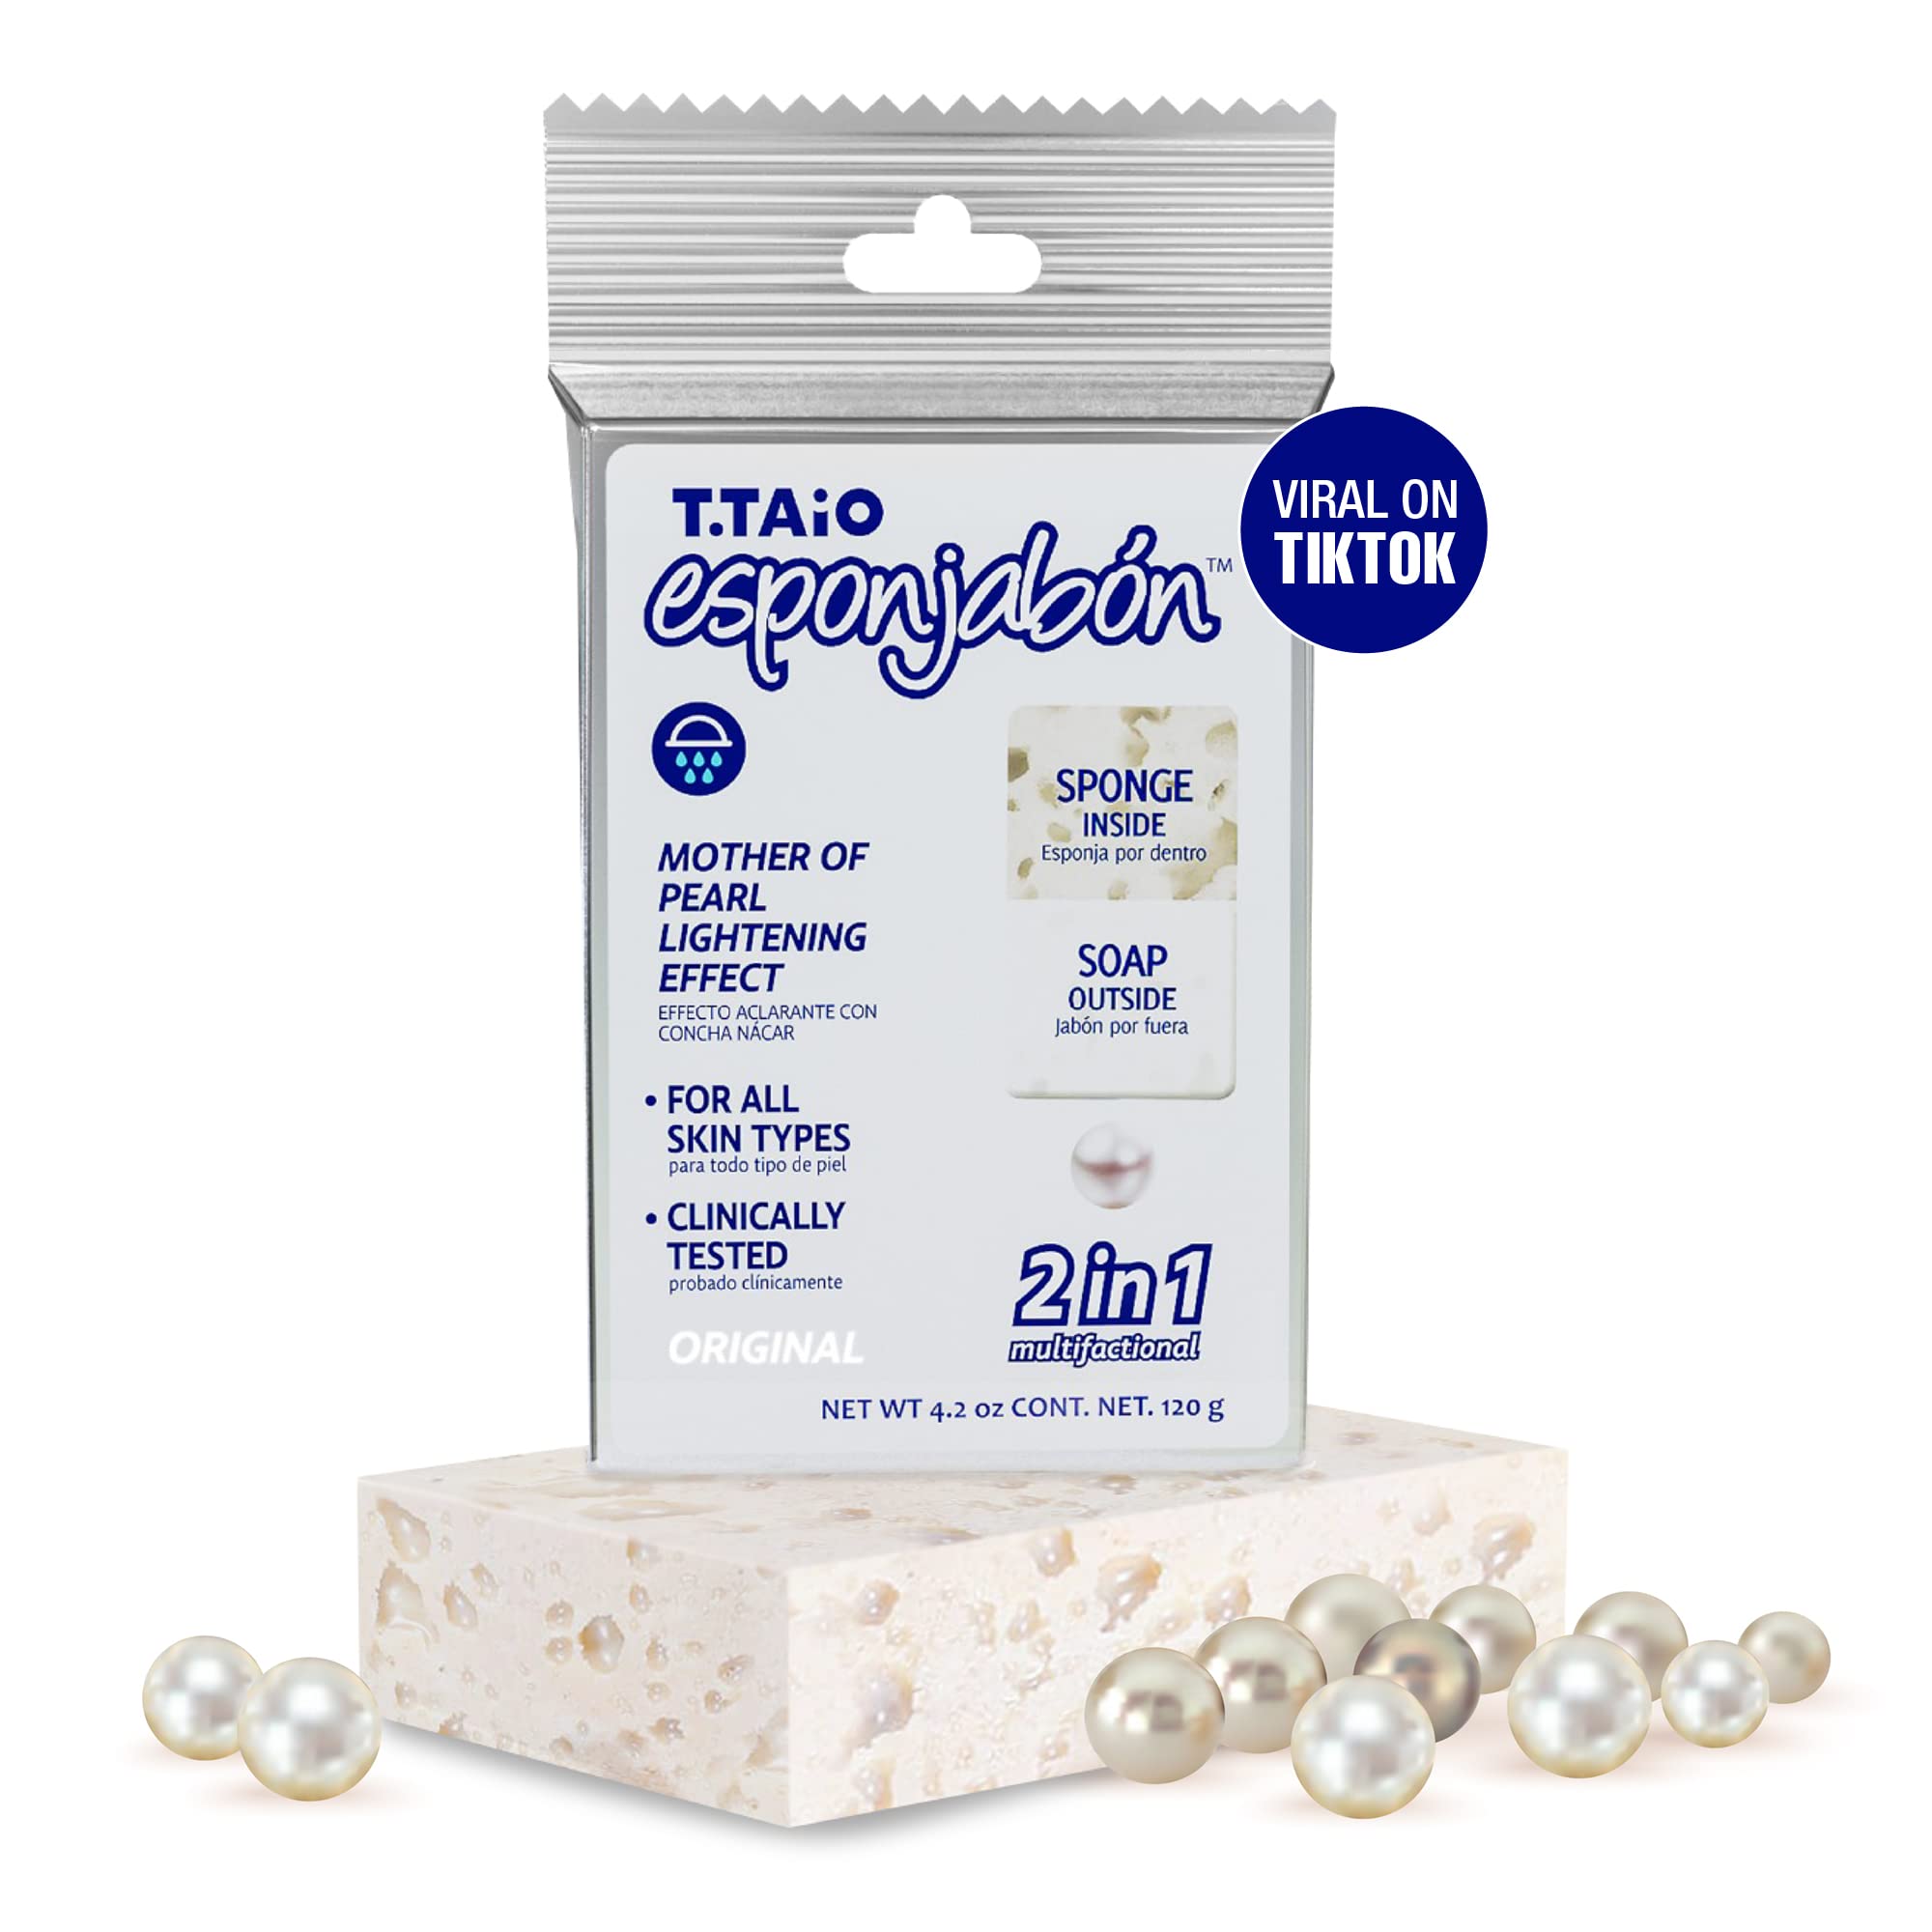 T. Taio Mother of Pearl Esponjabon Soap Sponge - Gentle Shower Scrubber - Cleaning Bath Wash Scrub - Dirt & Oil Removal - Massage & Lather Foot, Elbow, & Face Bathroom Accessories Fresh Nacre Scent